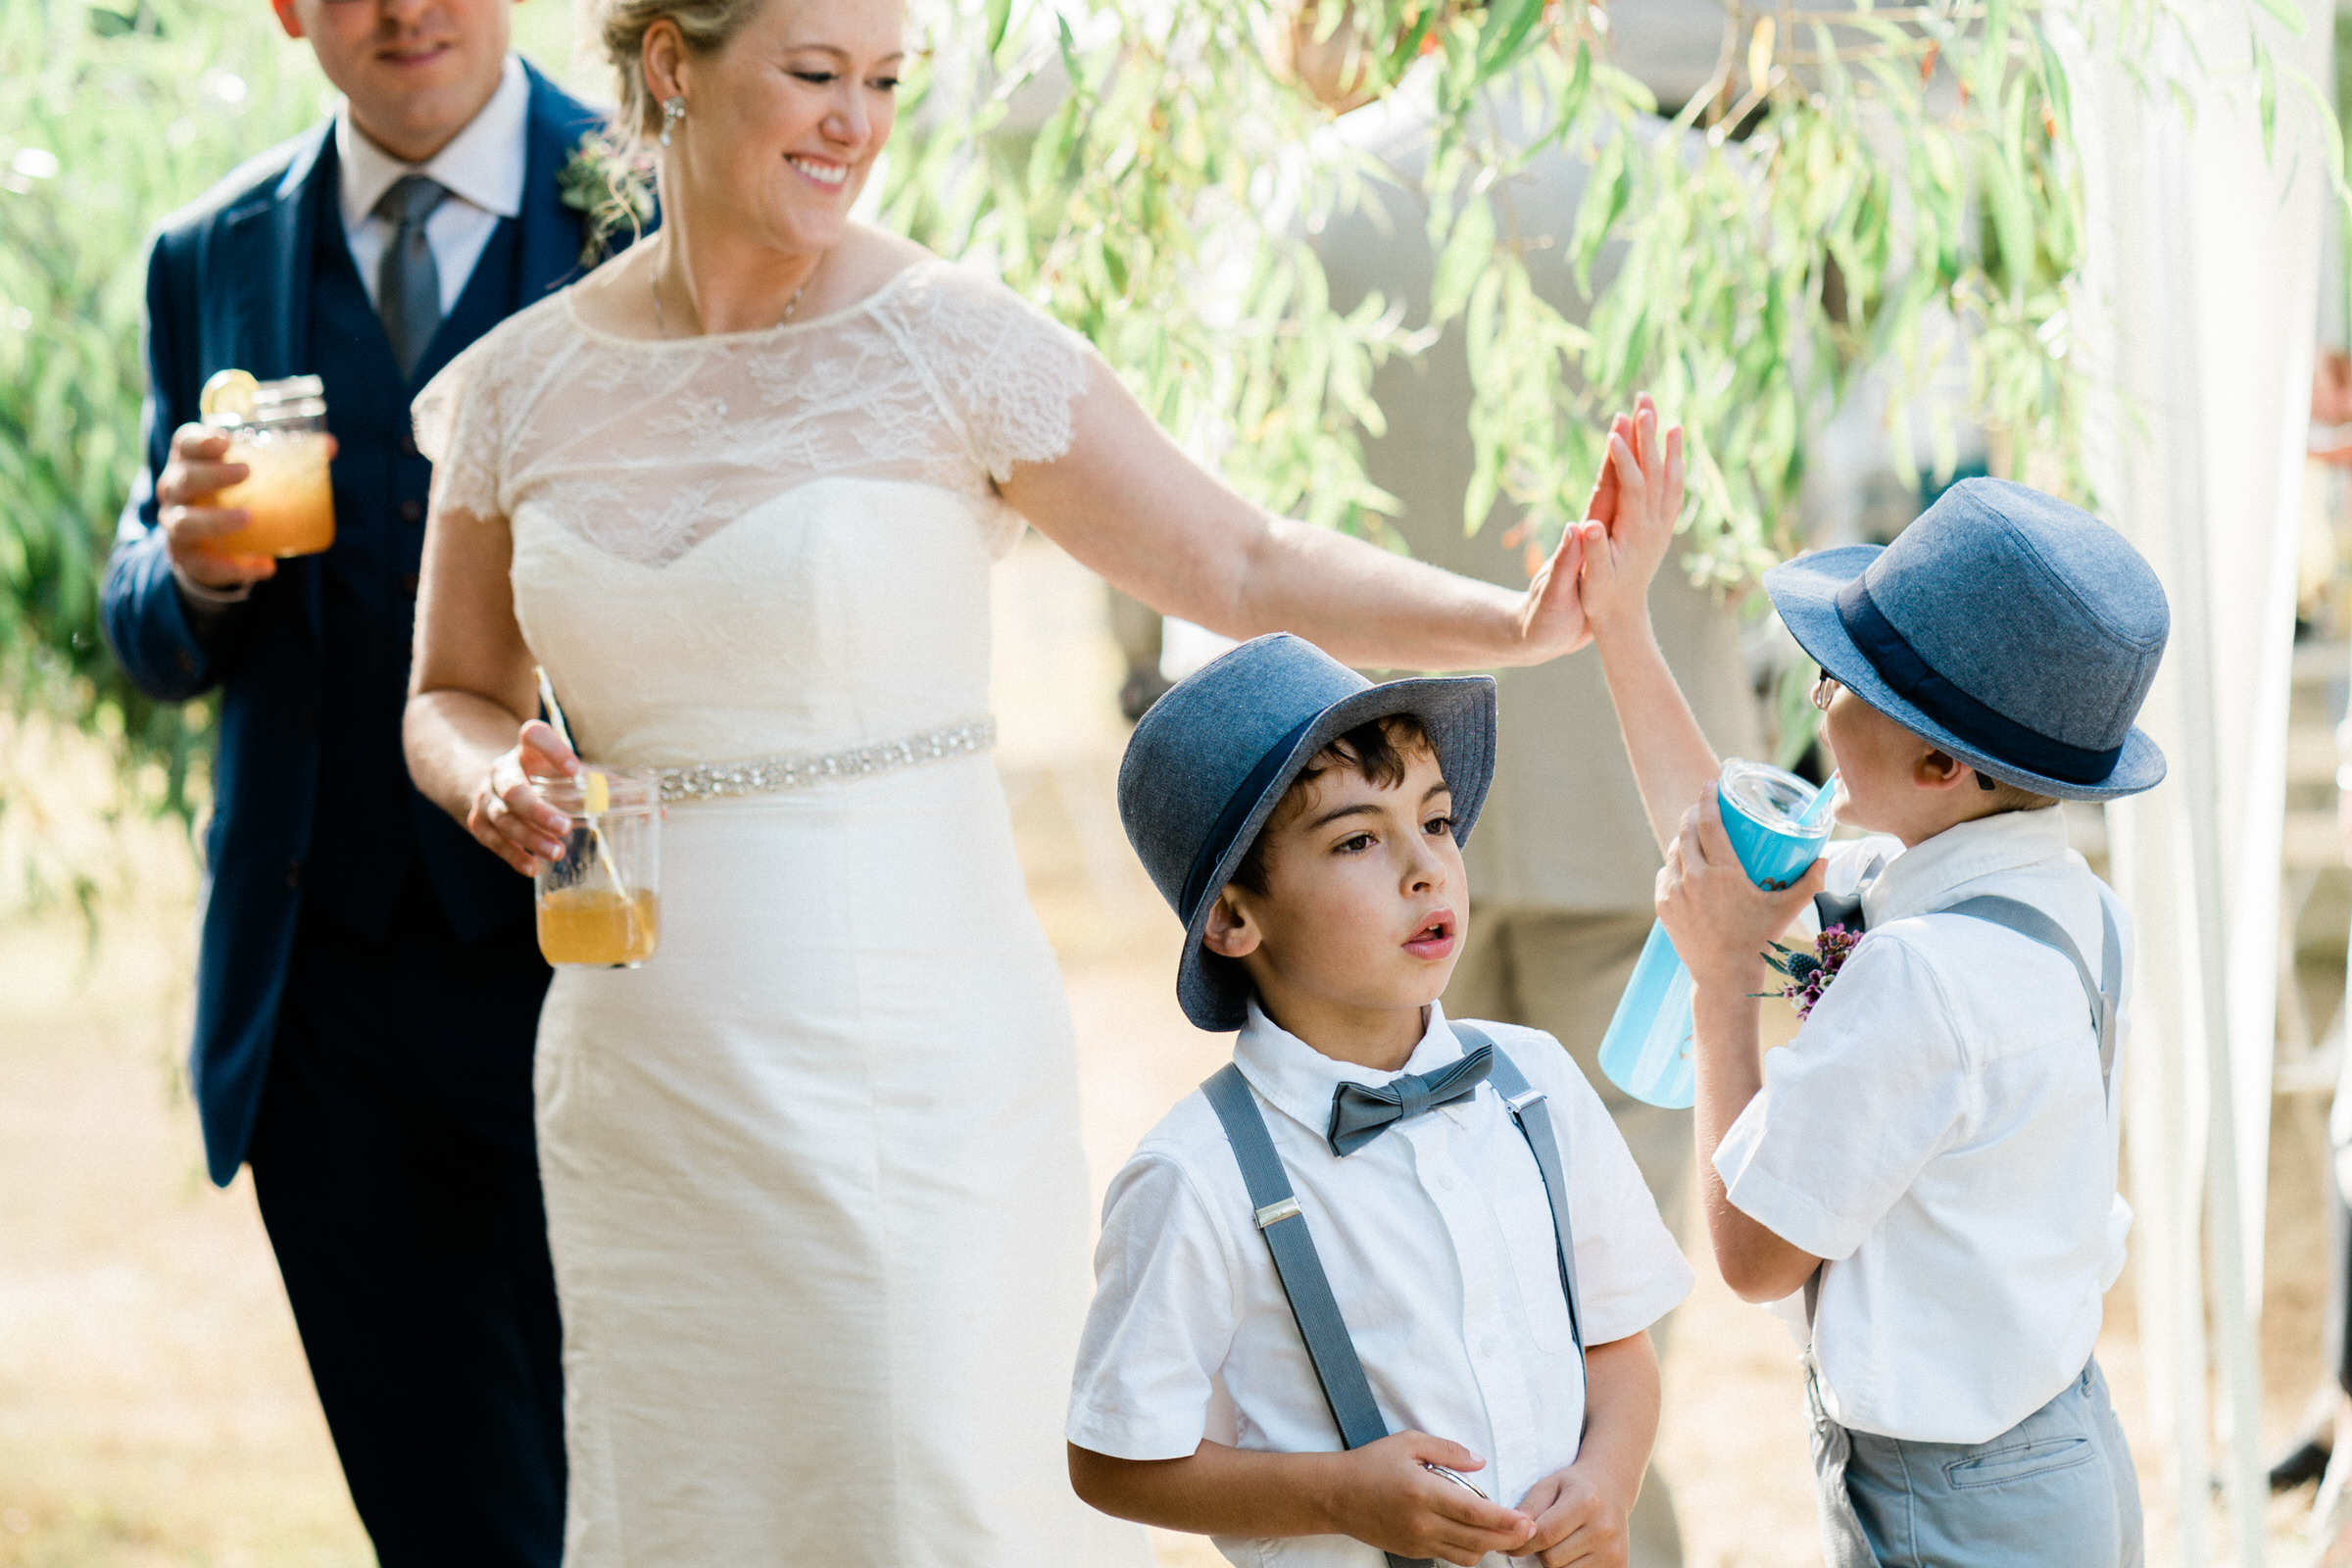 Wayfarer Whidbey Island Wedding: The bride high-fives one of the little groomsmen for a job well done